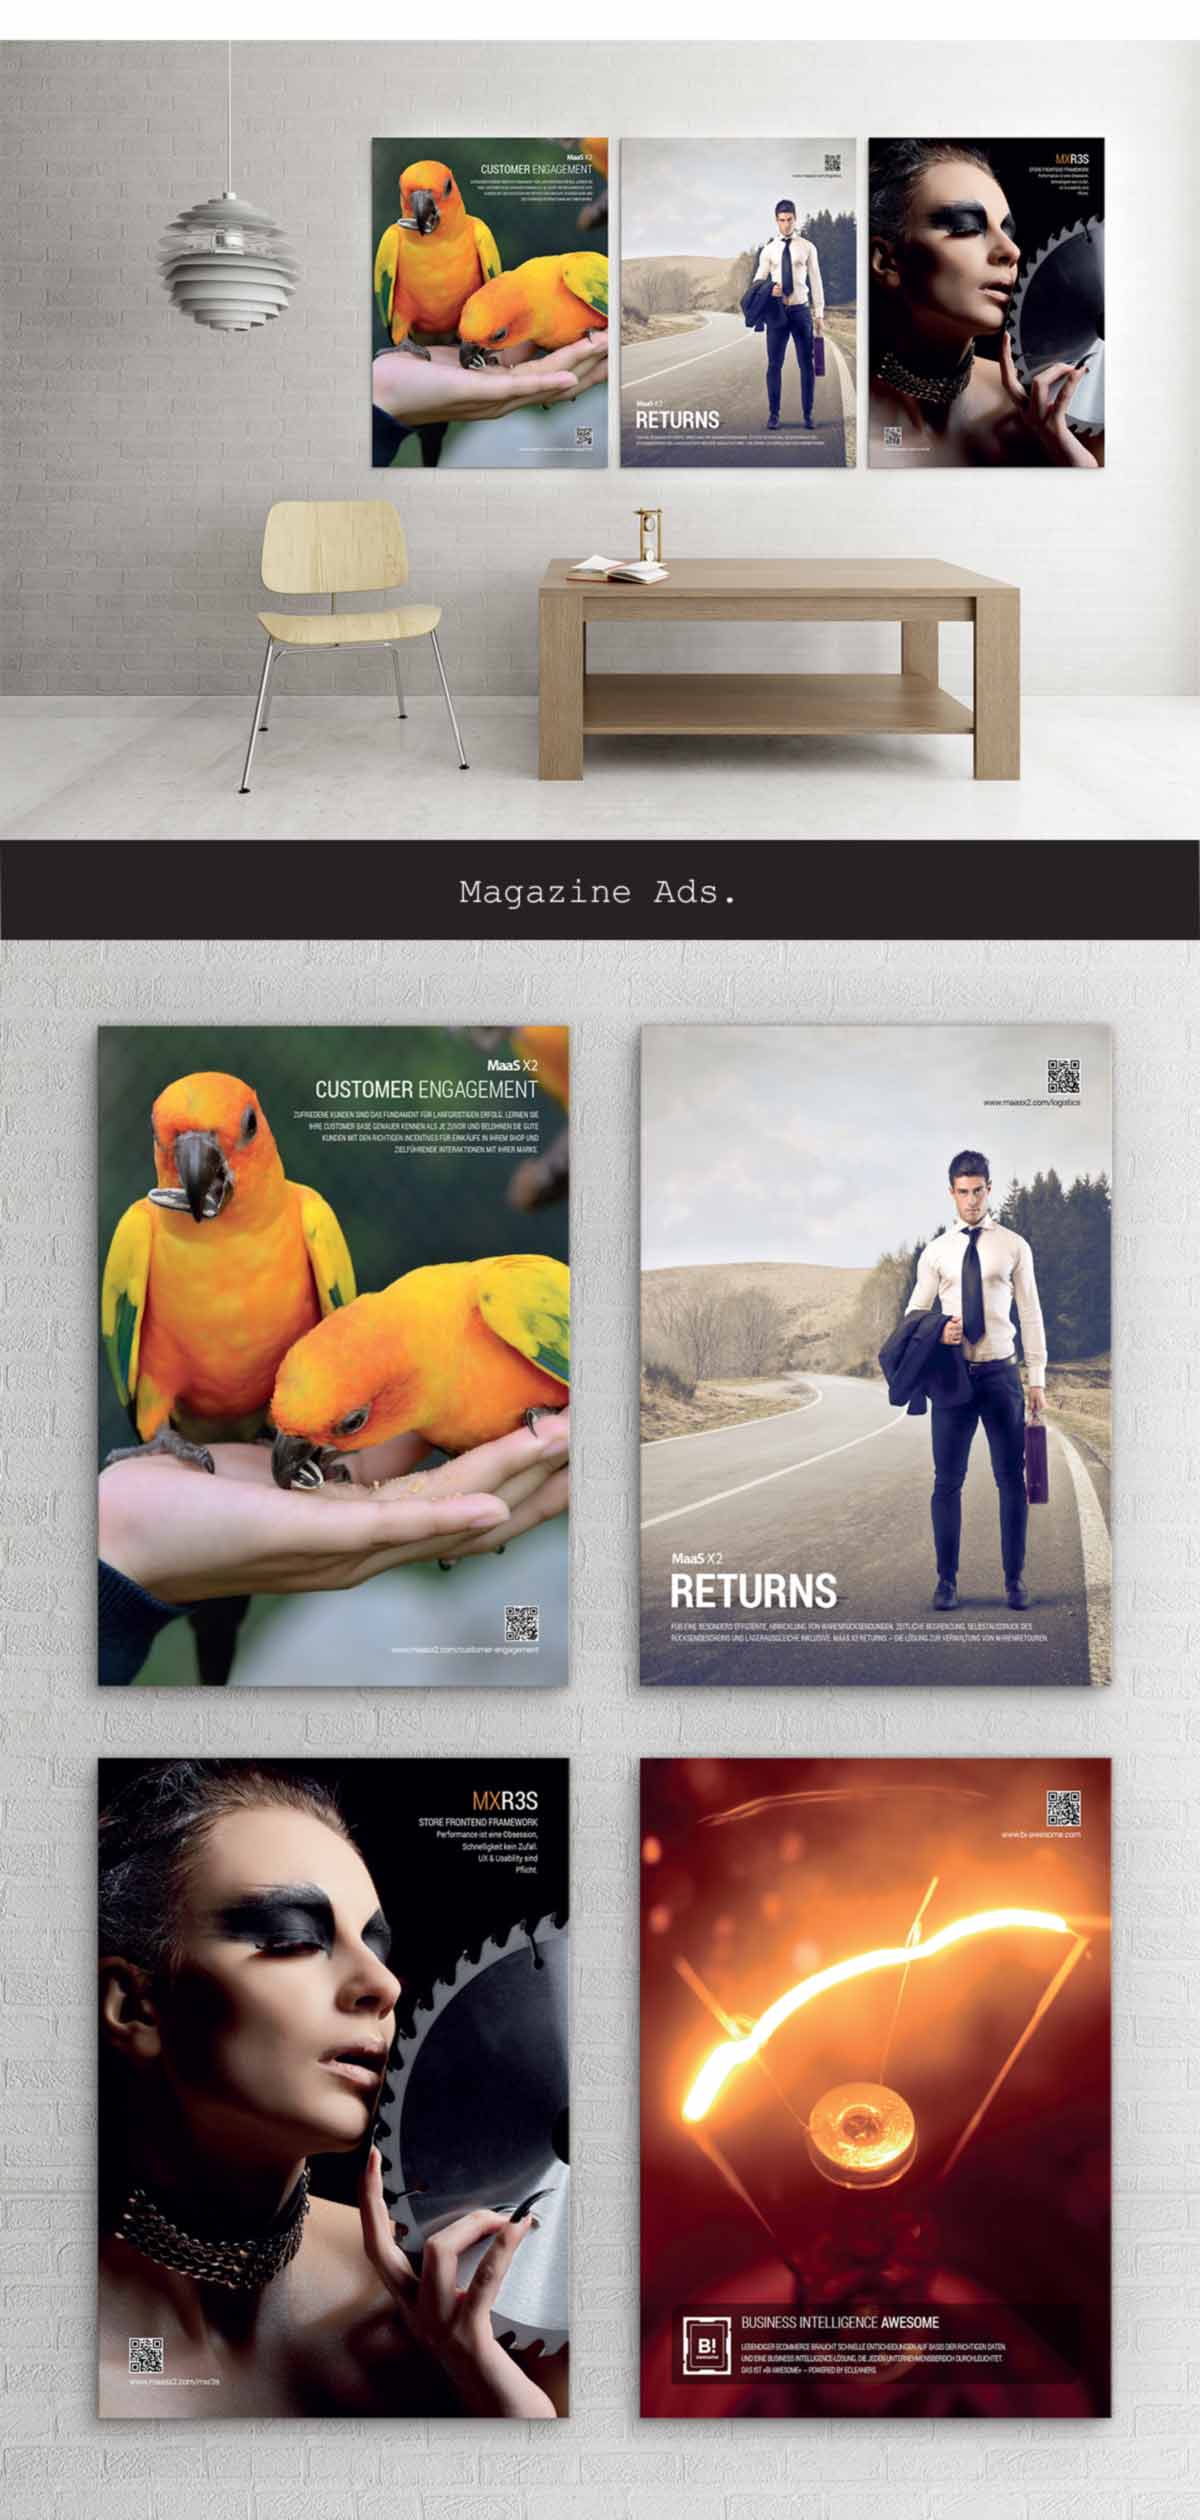 gregory-dreamer-project-ecommerce-alive-07-ads